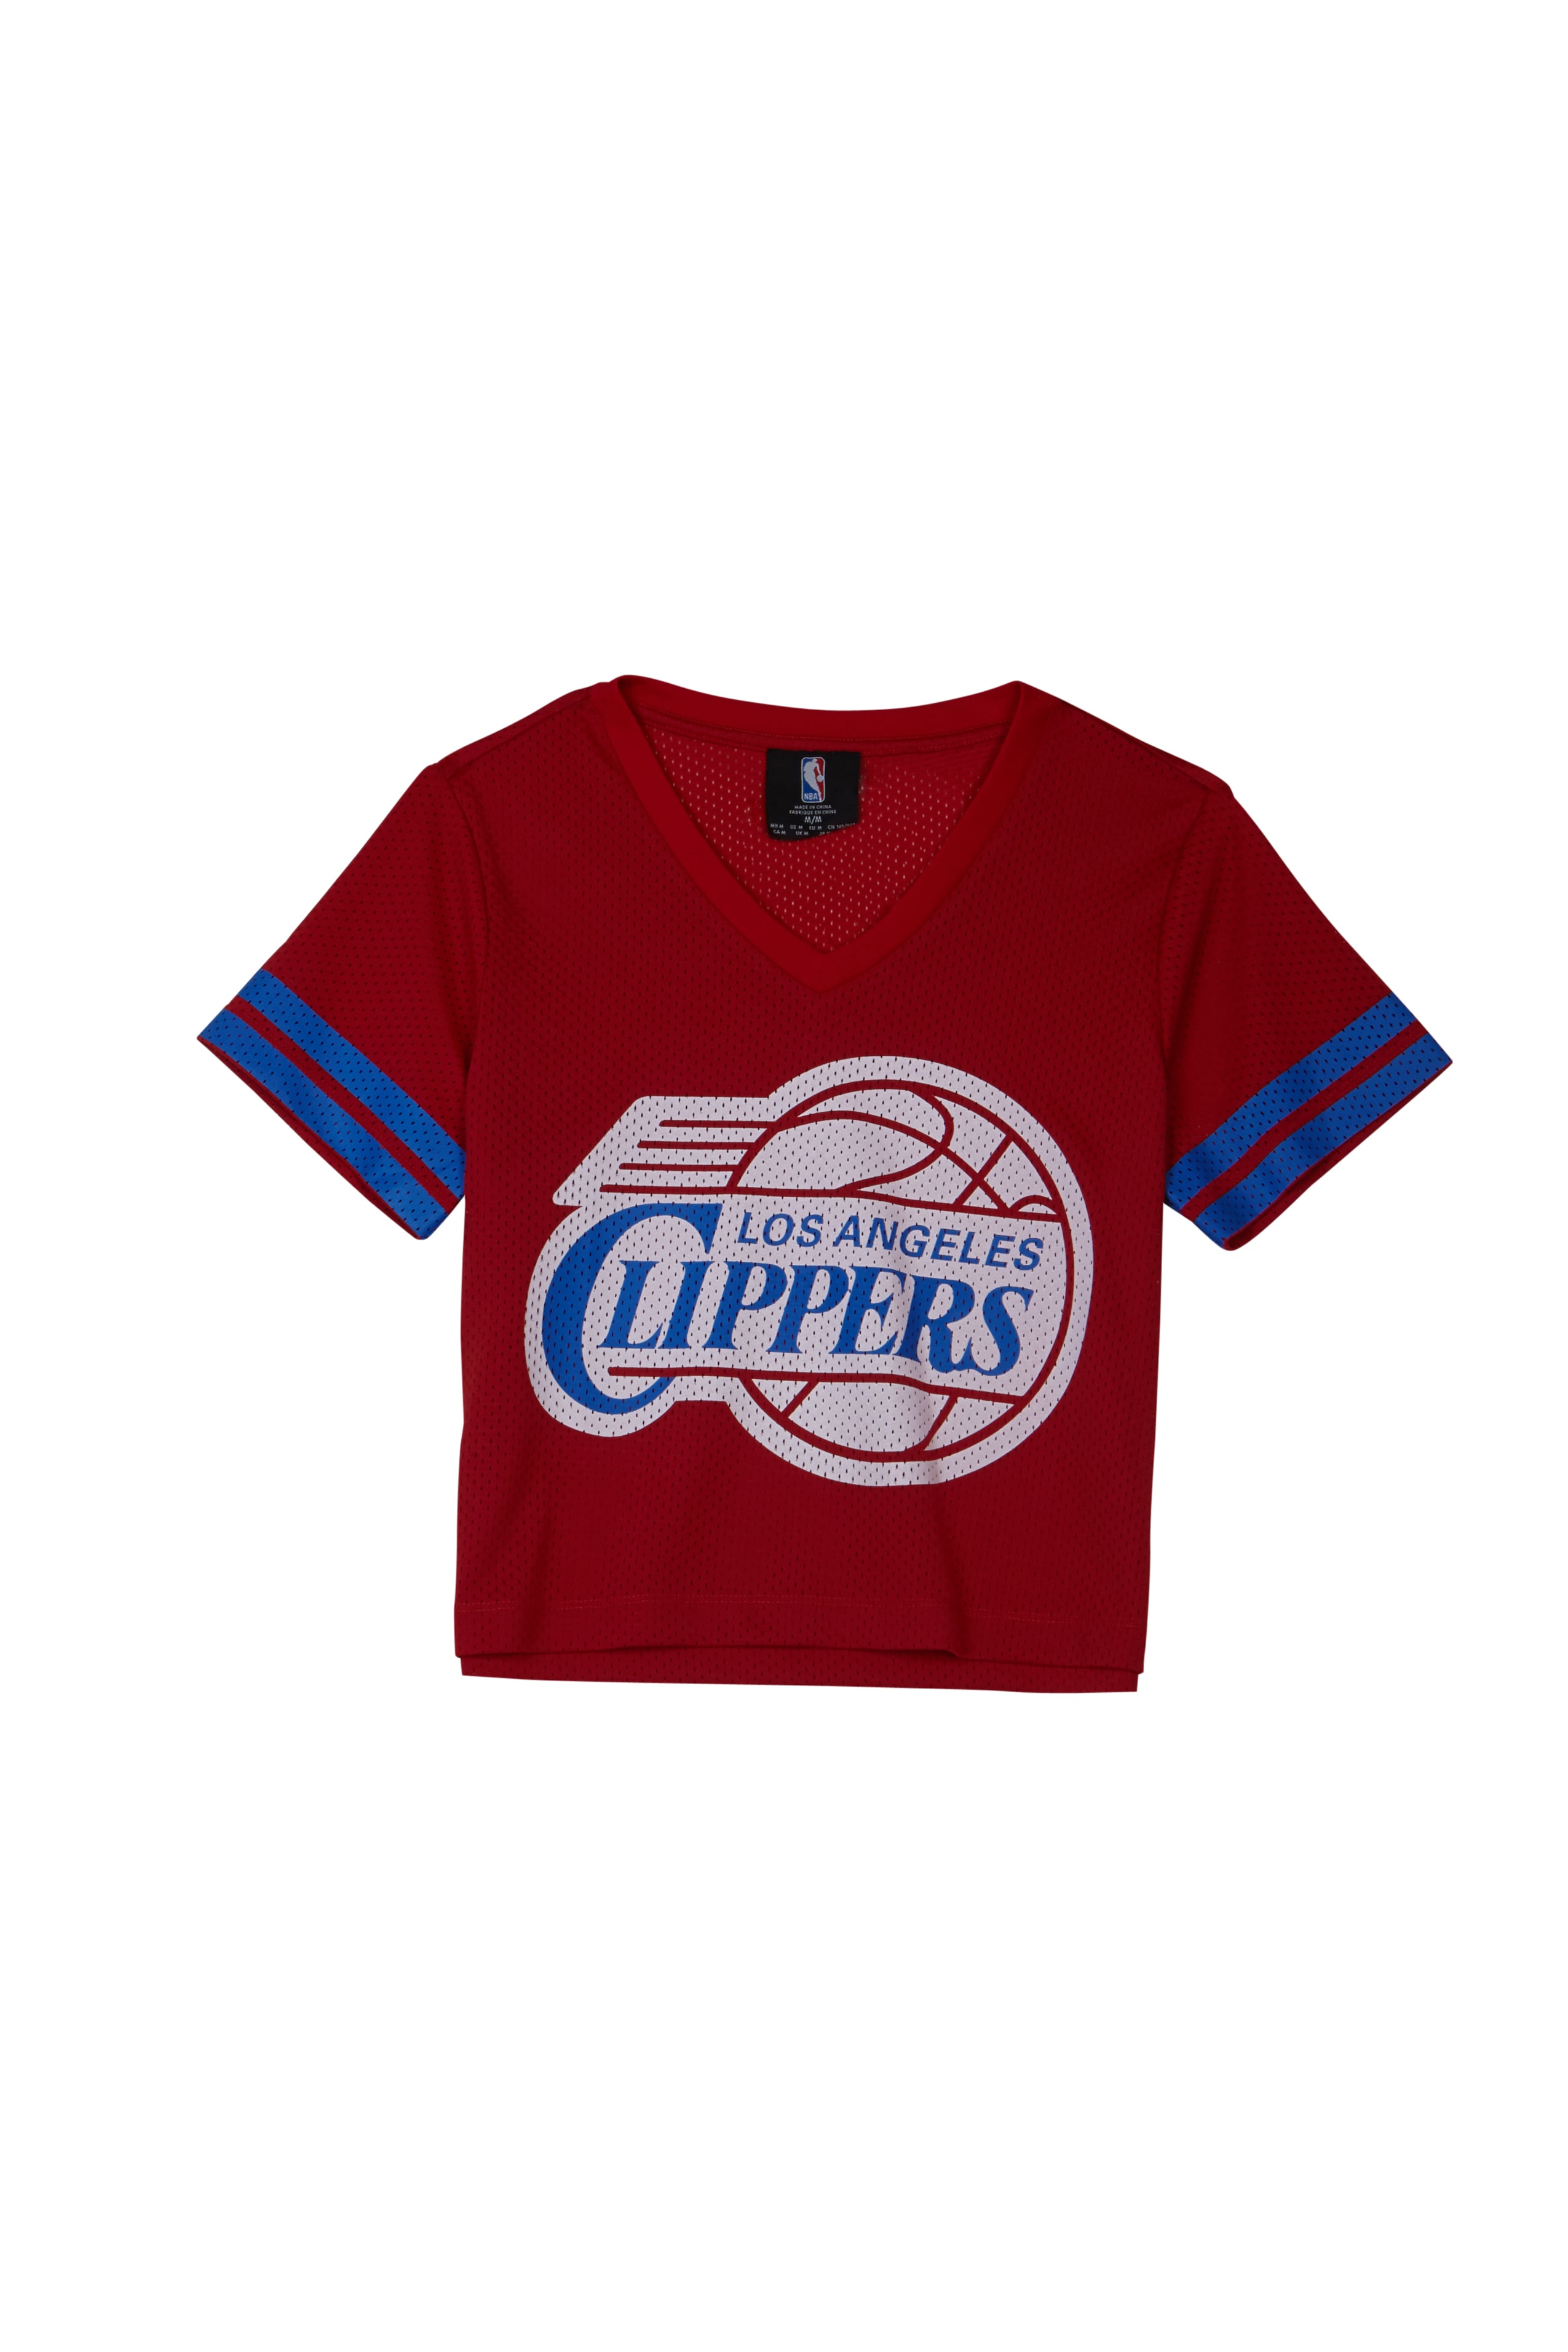 NBA Collection For Forever 21 of Basketball Team Logo Tees